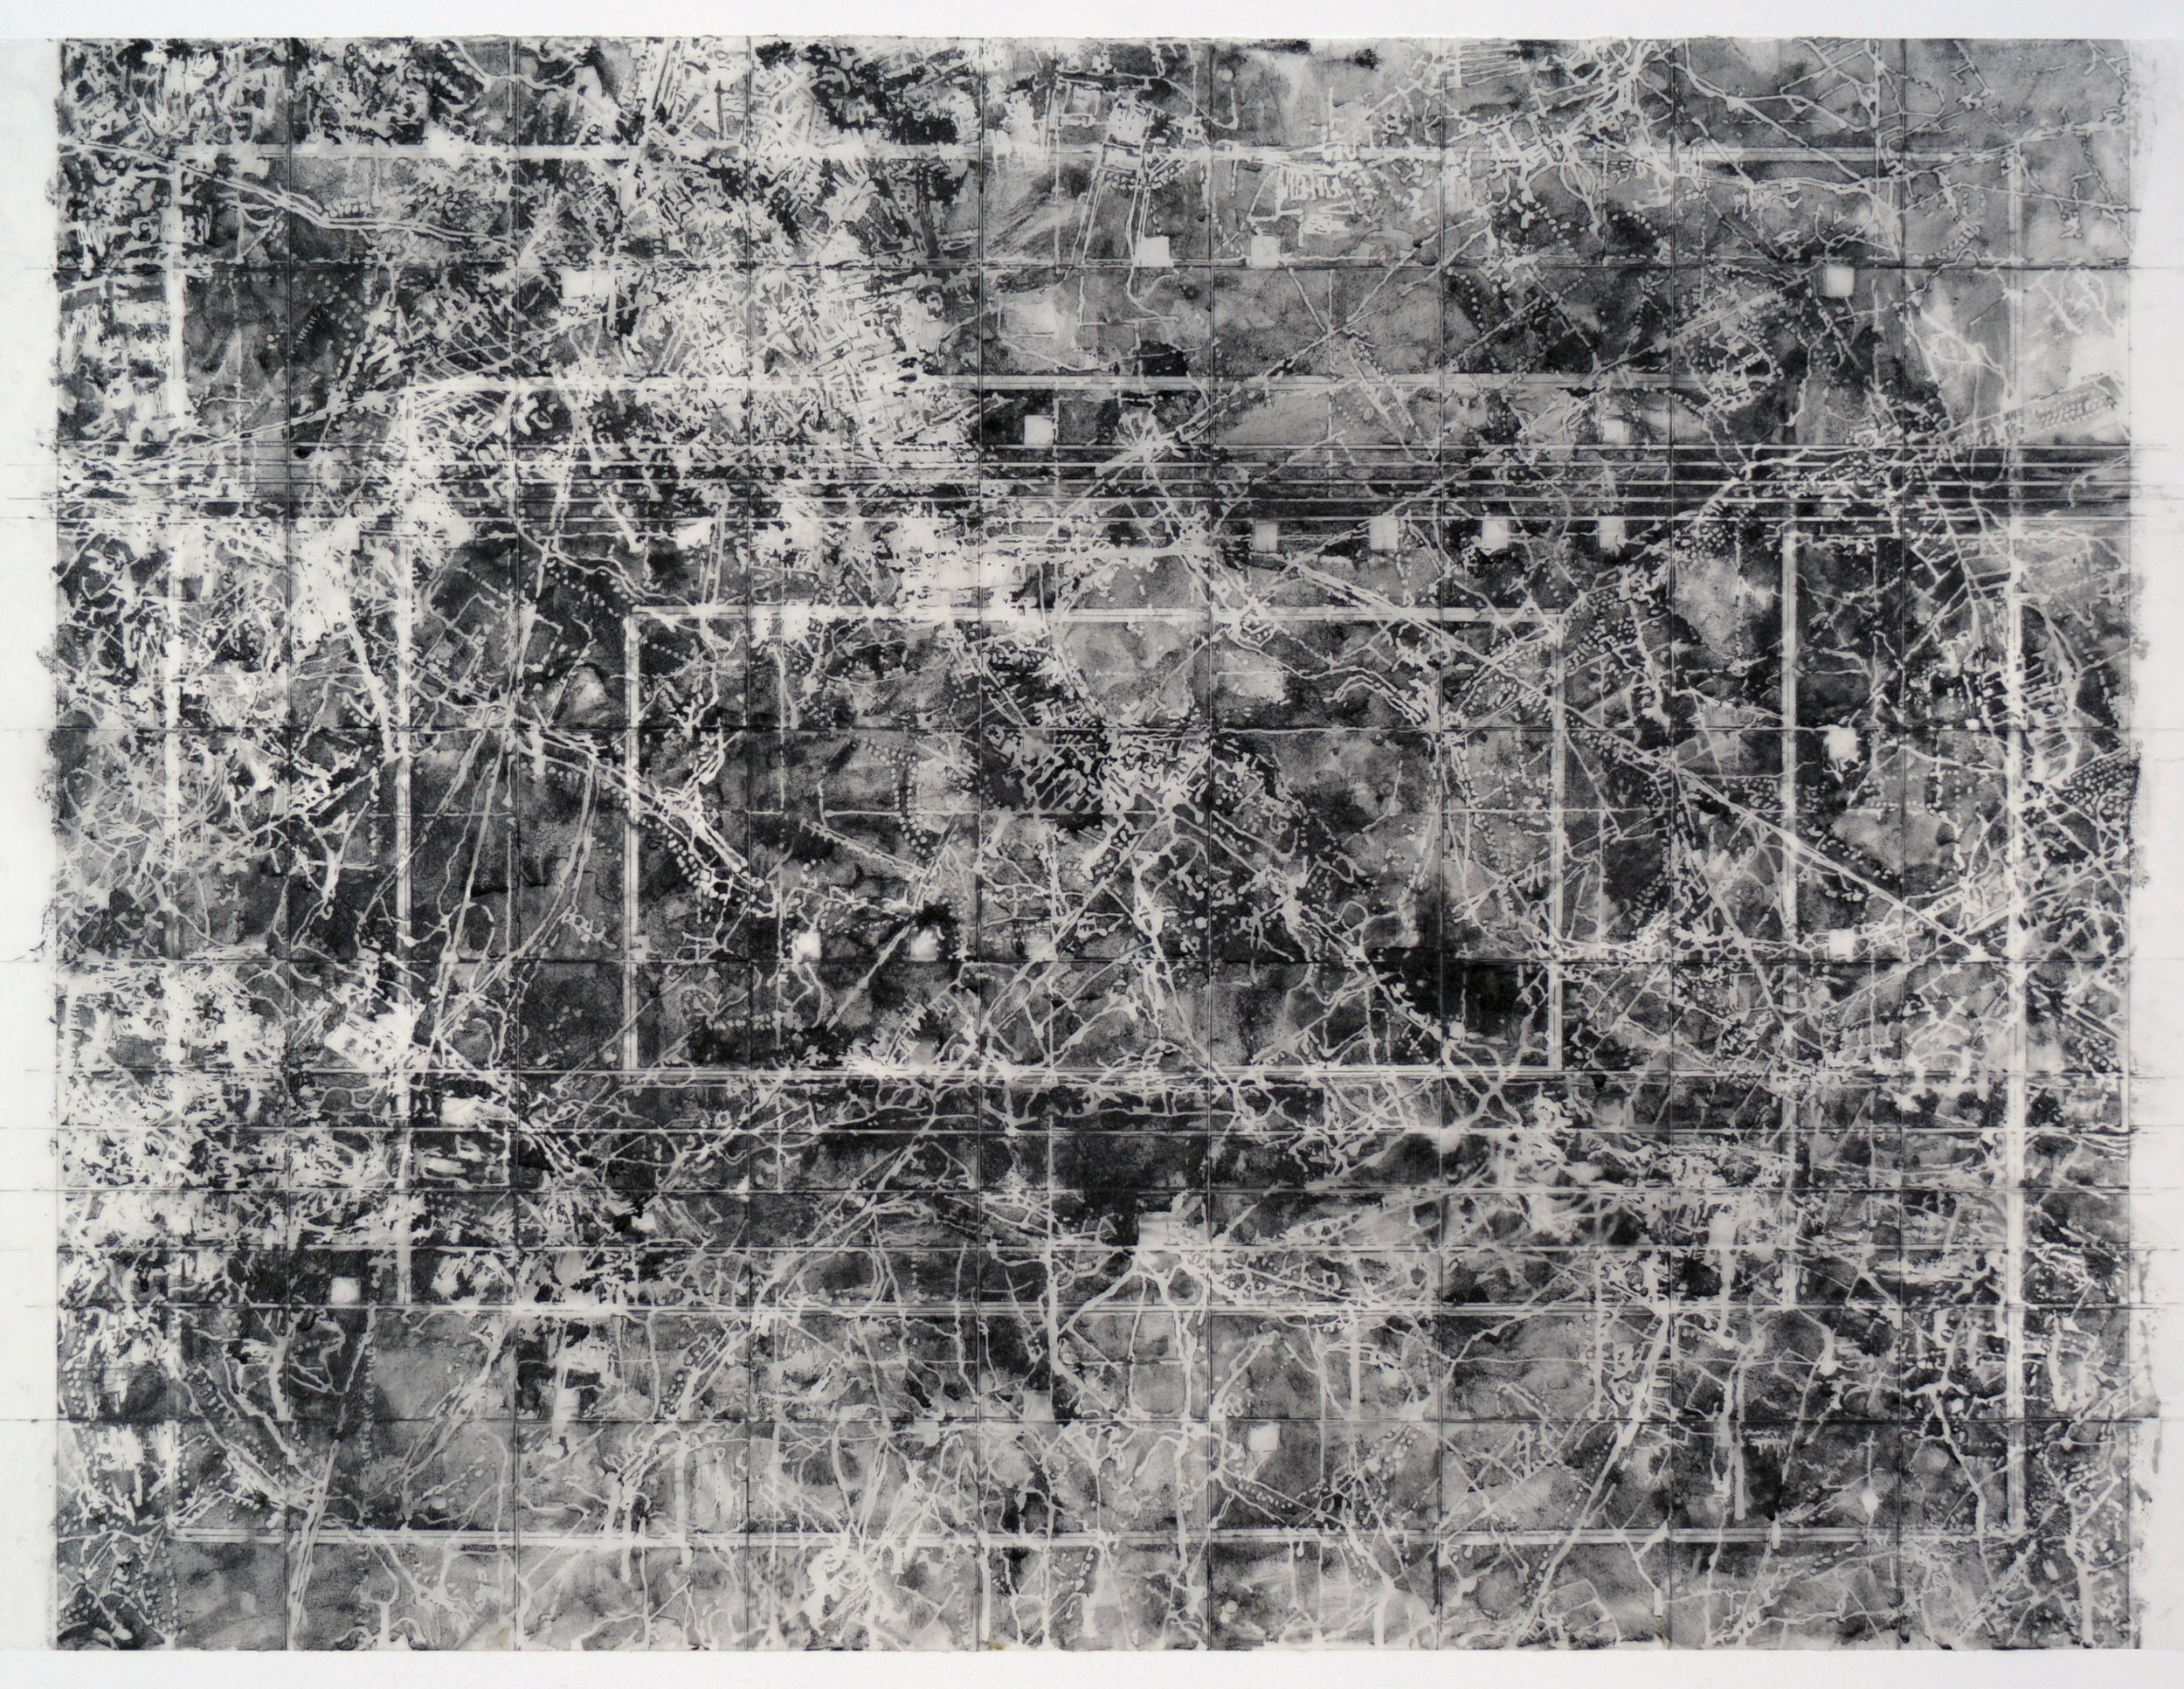    Barriers  , 2015  Graphite and mixed media on dura-lar  28 x 36 in 